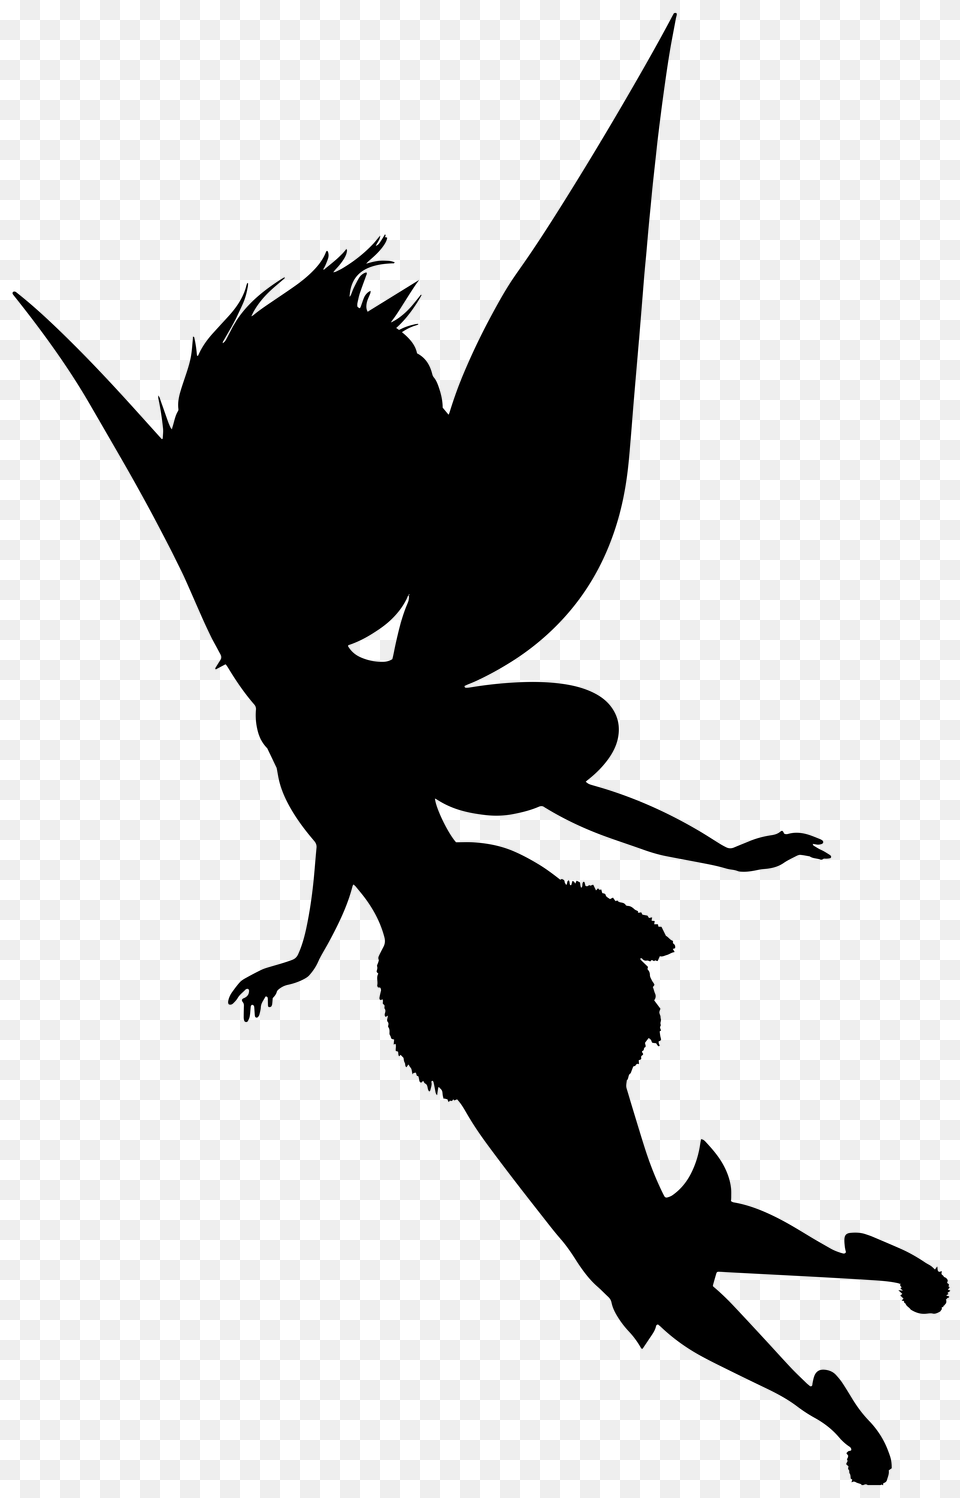 Image Result For Fairy Silhouette Fairies, Adapter, Electronics, Lighting Png